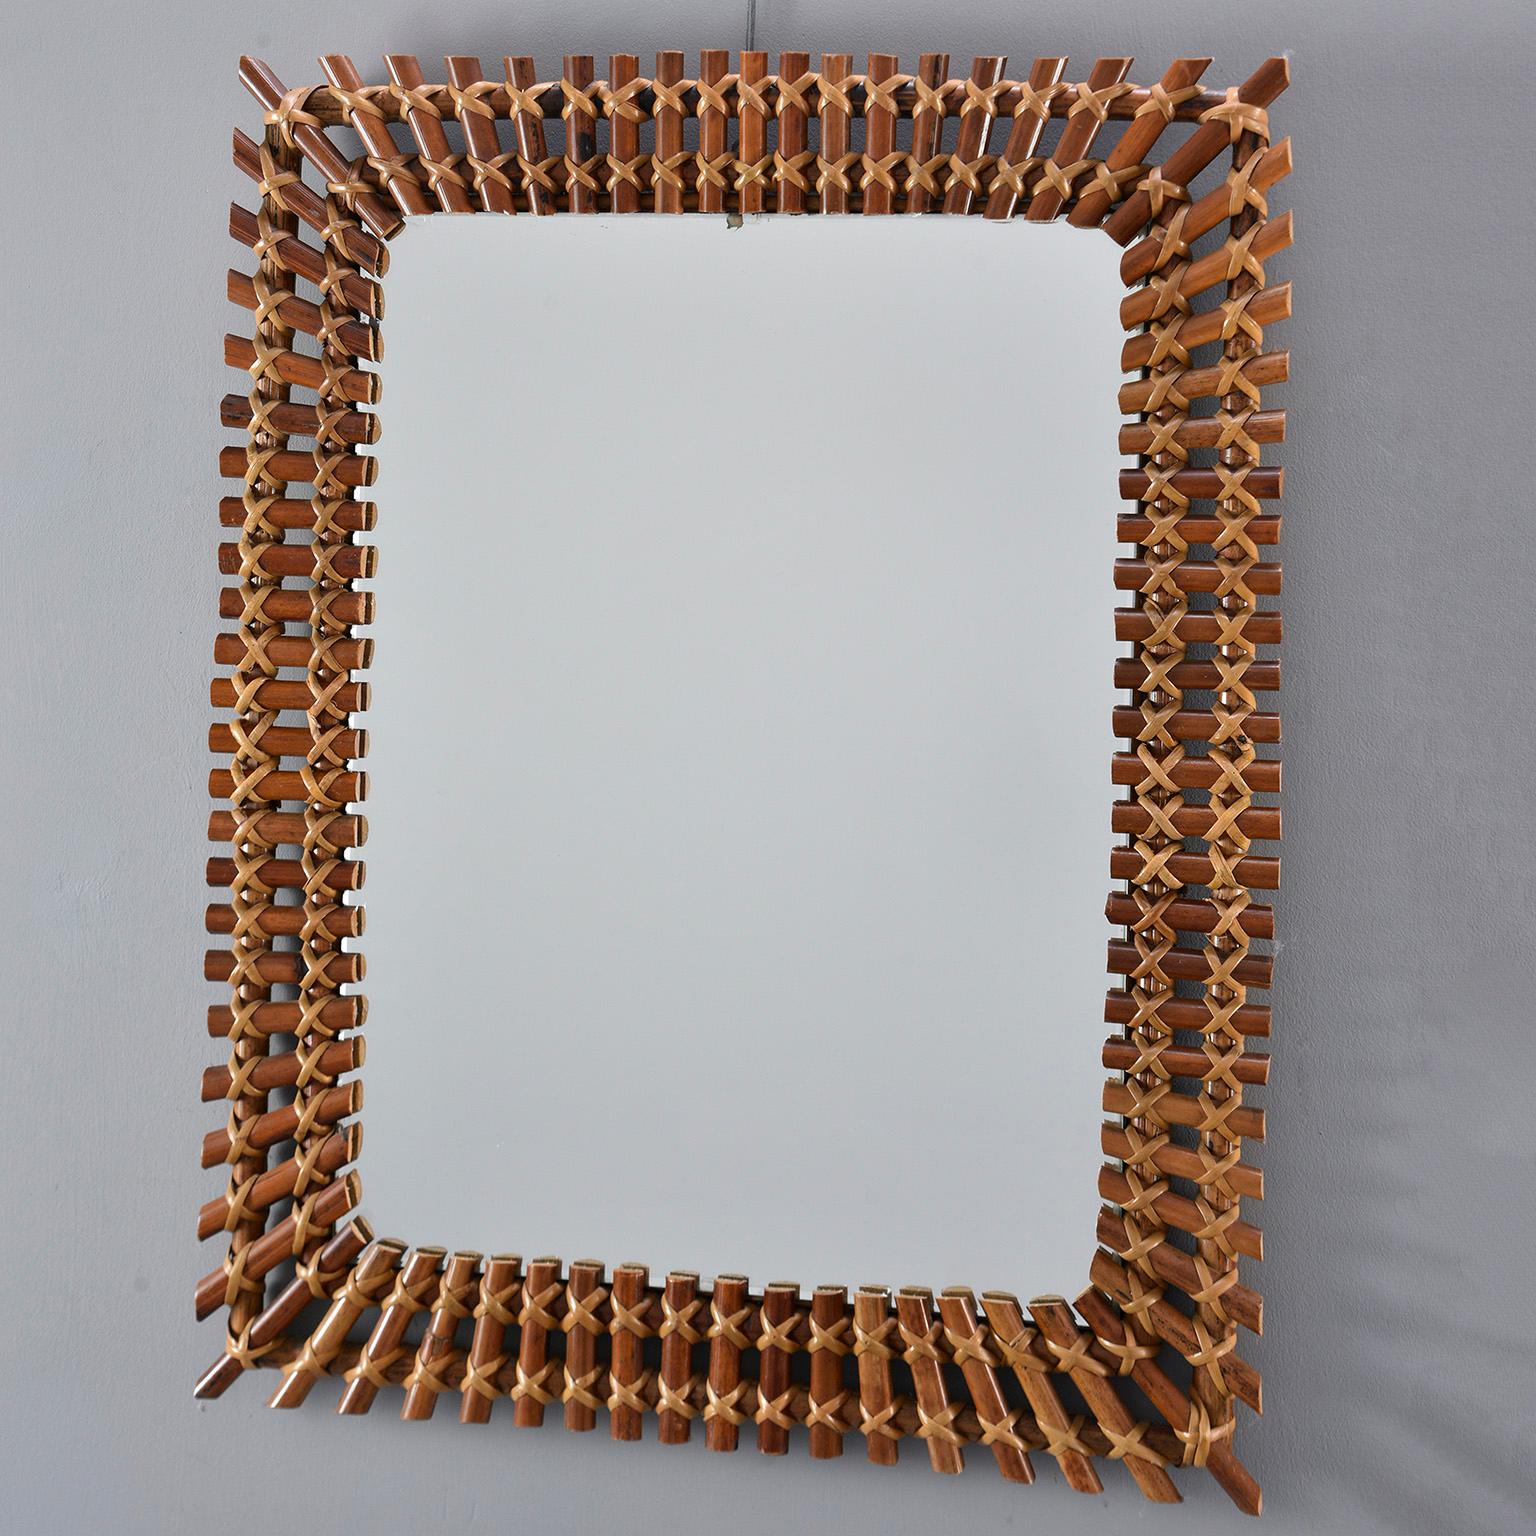 Rectangular mirror of unknown origins found in Italy features a frame made of bamboo reeds with contrasting hand-tied caning reed, circa 1960s. Unknown maker. Other mirrors with similarly styled frames available at time of this posting.